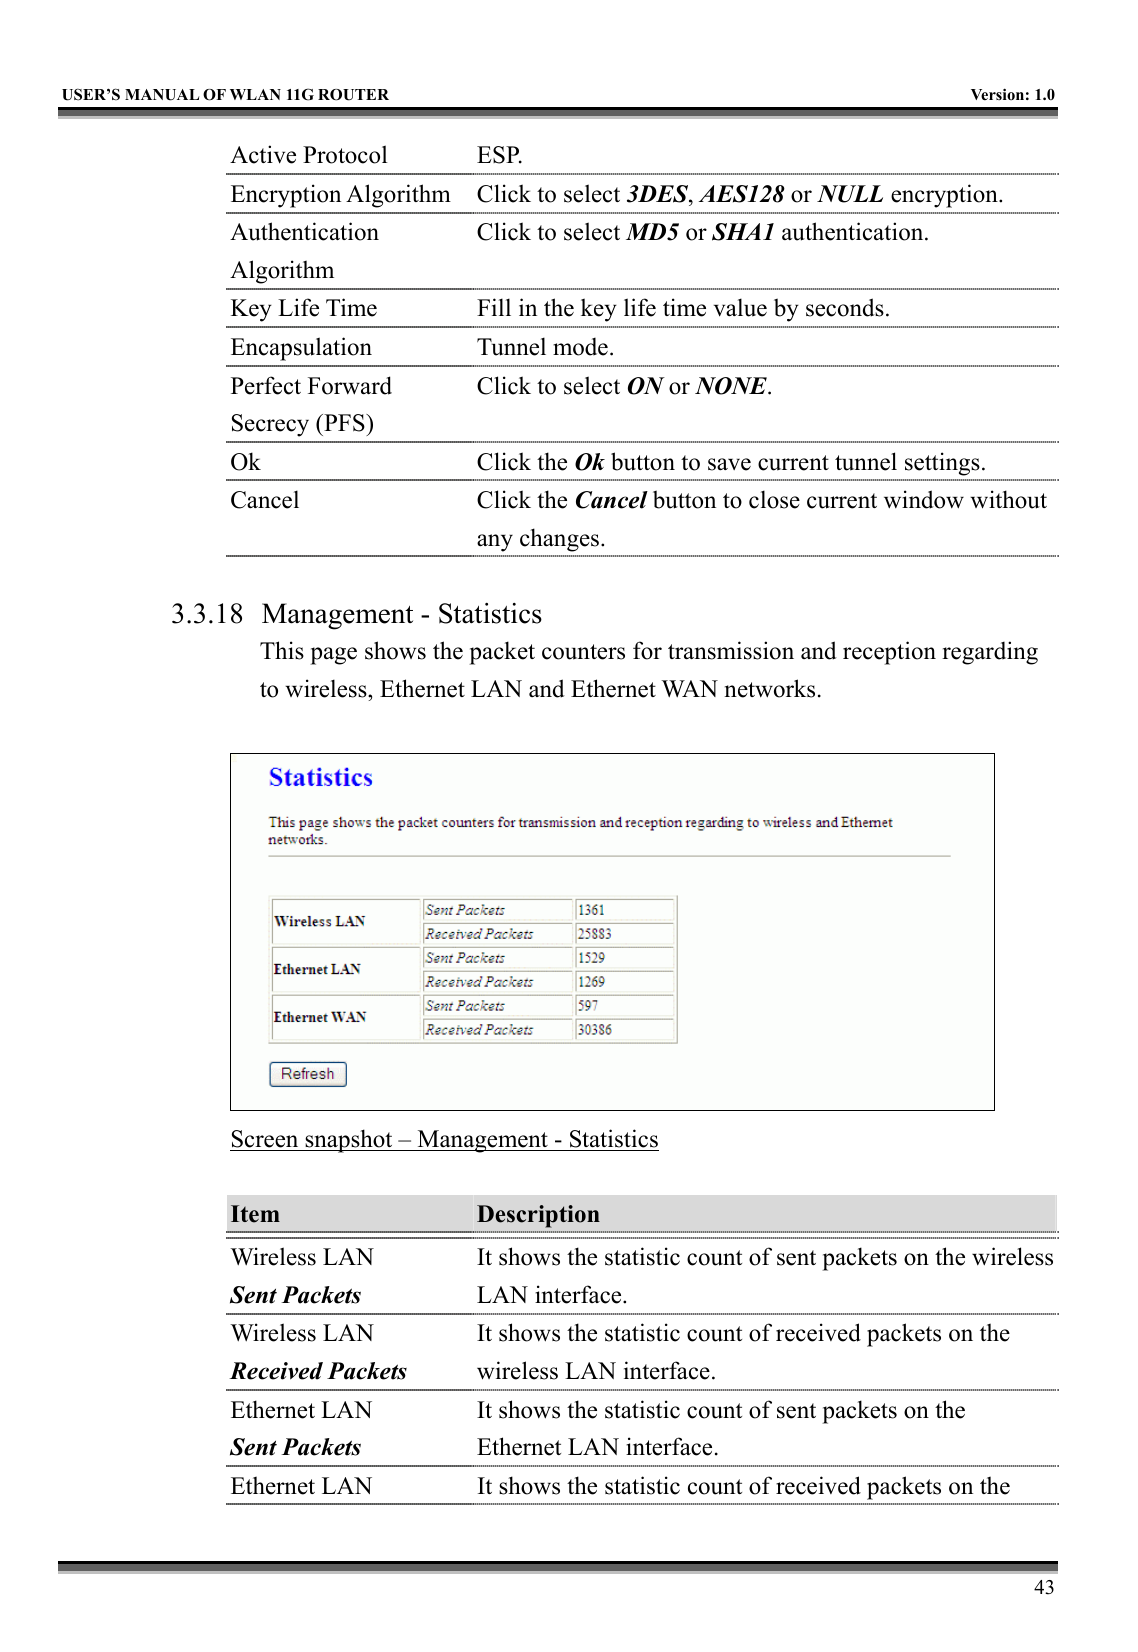   USER’S MANUAL OF WLAN 11G ROUTER    Version: 1.0     43 Active Protocol  ESP. Encryption Algorithm  Click to select 3DES, AES128 or NULL encryption. Authentication Algorithm Click to select MD5 or SHA1 authentication. Key Life Time  Fill in the key life time value by seconds. Encapsulation Tunnel mode. Perfect Forward Secrecy (PFS) Click to select ON or NONE. Ok Click the Ok button to save current tunnel settings. Cancel Click the Cancel button to close current window without any changes.  3.3.18  Management - Statistics This page shows the packet counters for transmission and reception regarding to wireless, Ethernet LAN and Ethernet WAN networks.   Screen snapshot – Management - Statistics  Item  Description   Wireless LAN Sent Packets It shows the statistic count of sent packets on the wireless LAN interface. Wireless LAN Received Packets It shows the statistic count of received packets on the wireless LAN interface. Ethernet LAN Sent Packets It shows the statistic count of sent packets on the Ethernet LAN interface. Ethernet LAN  It shows the statistic count of received packets on the 